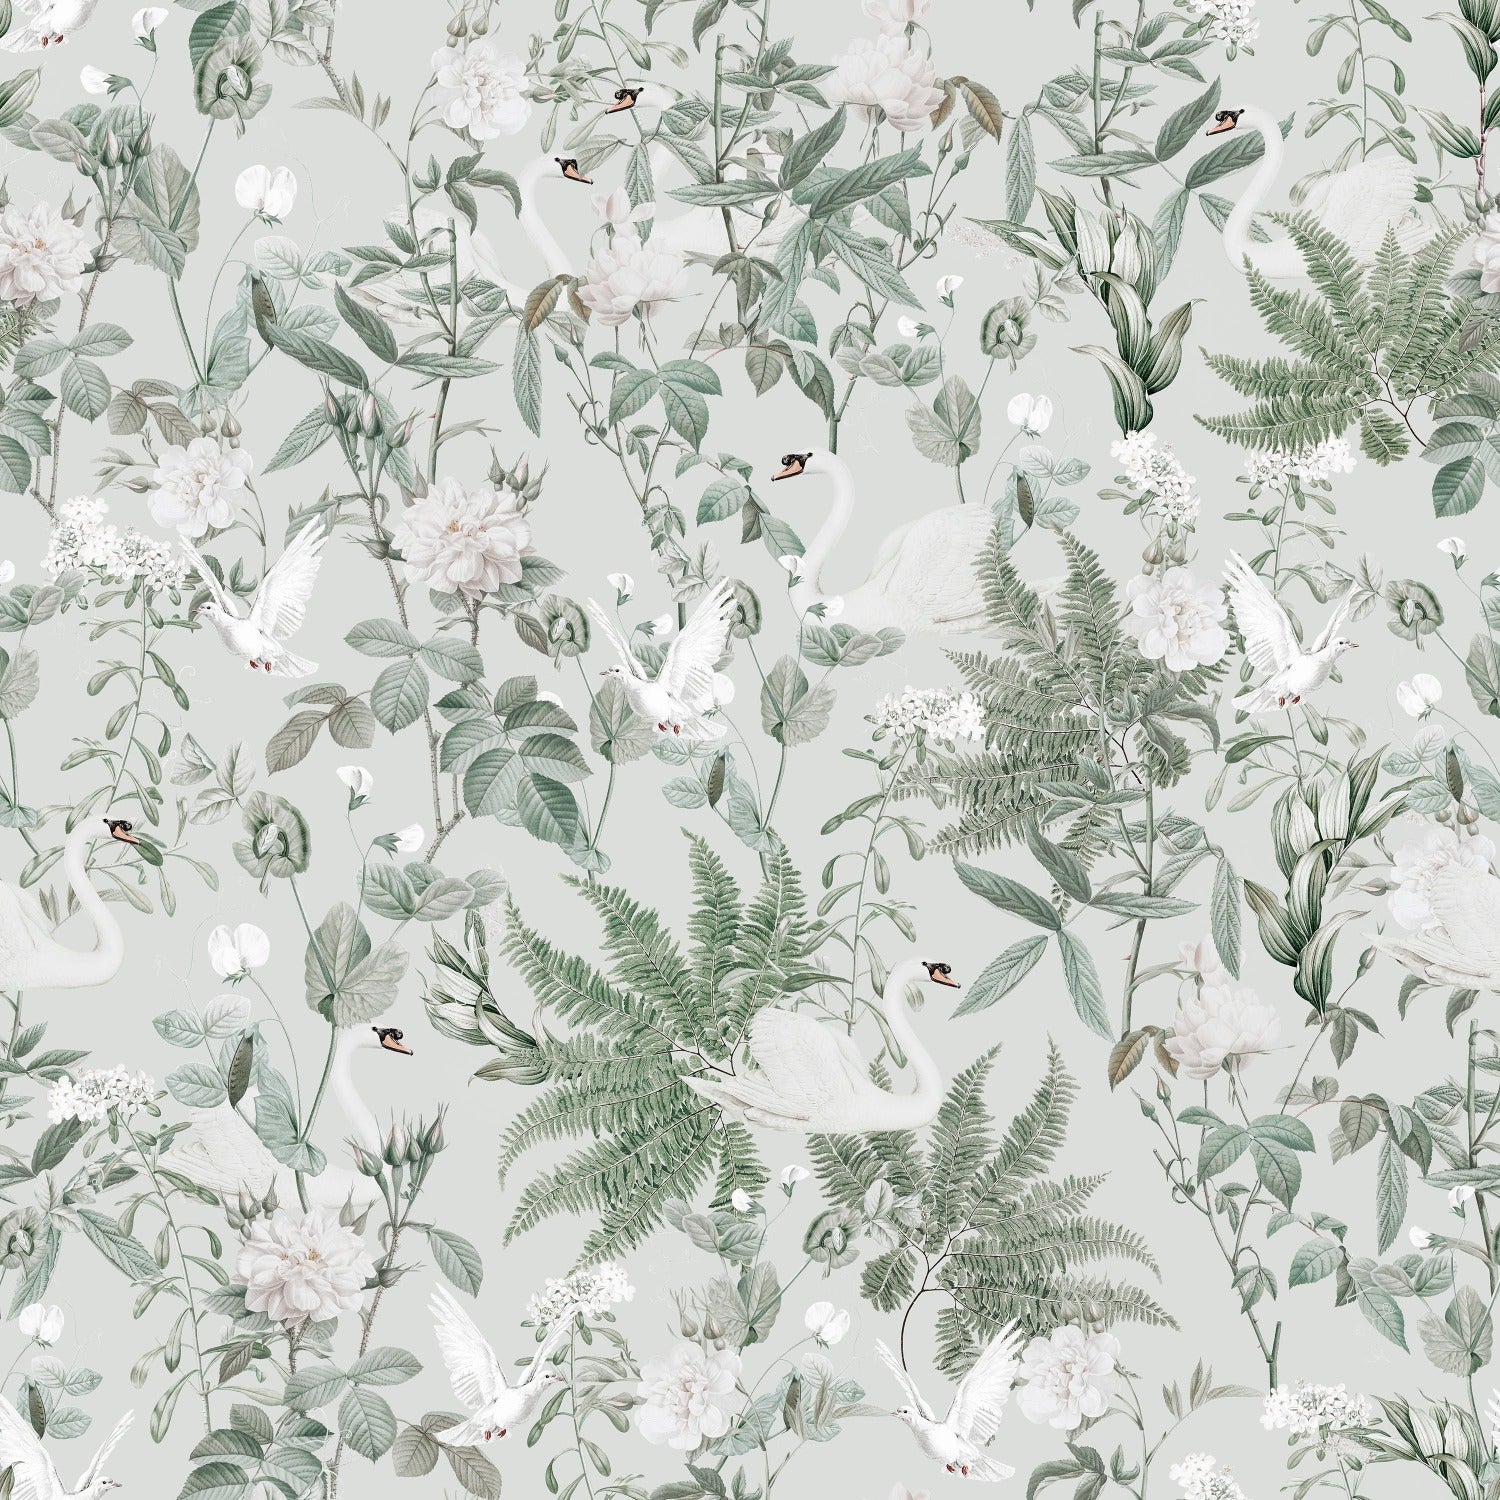 A delicate and artistic depiction of the Sage Bird Wallpaper, featuring a serene pattern of white swans and flying birds among lush green foliage and white flowers, all set against a soft sage green background.